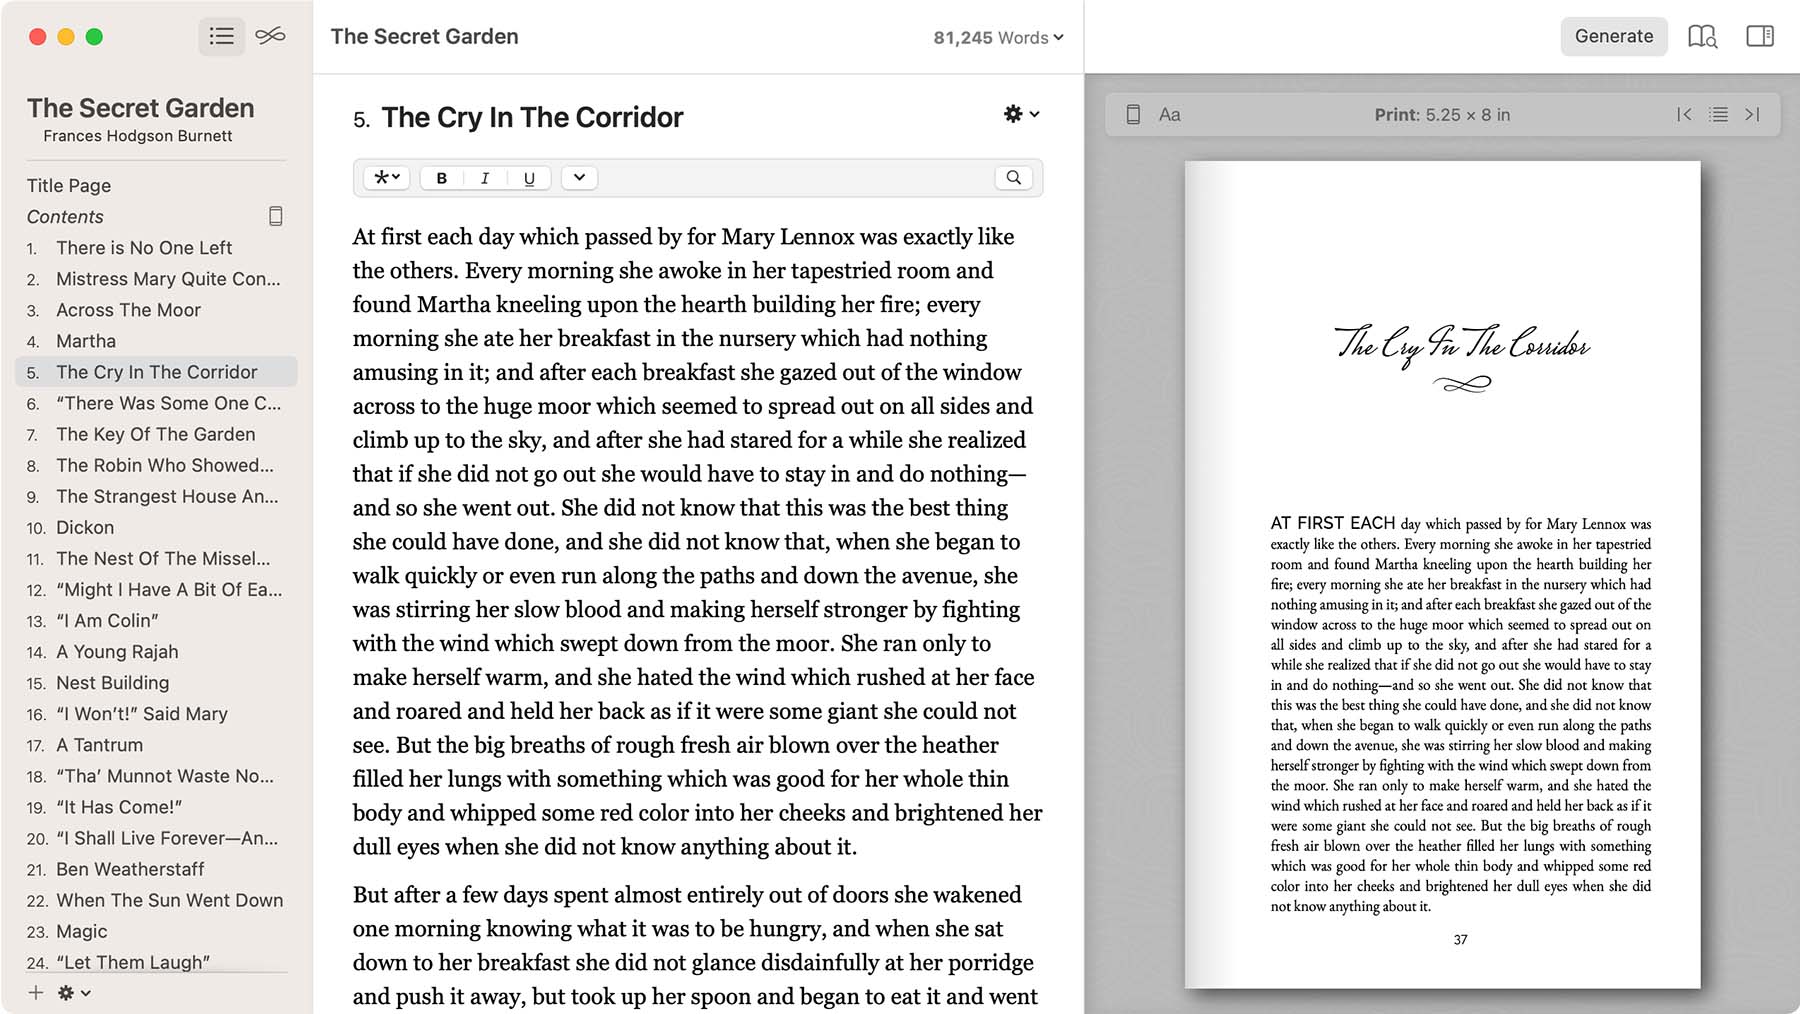 table of contents not appearing in kindle previewer